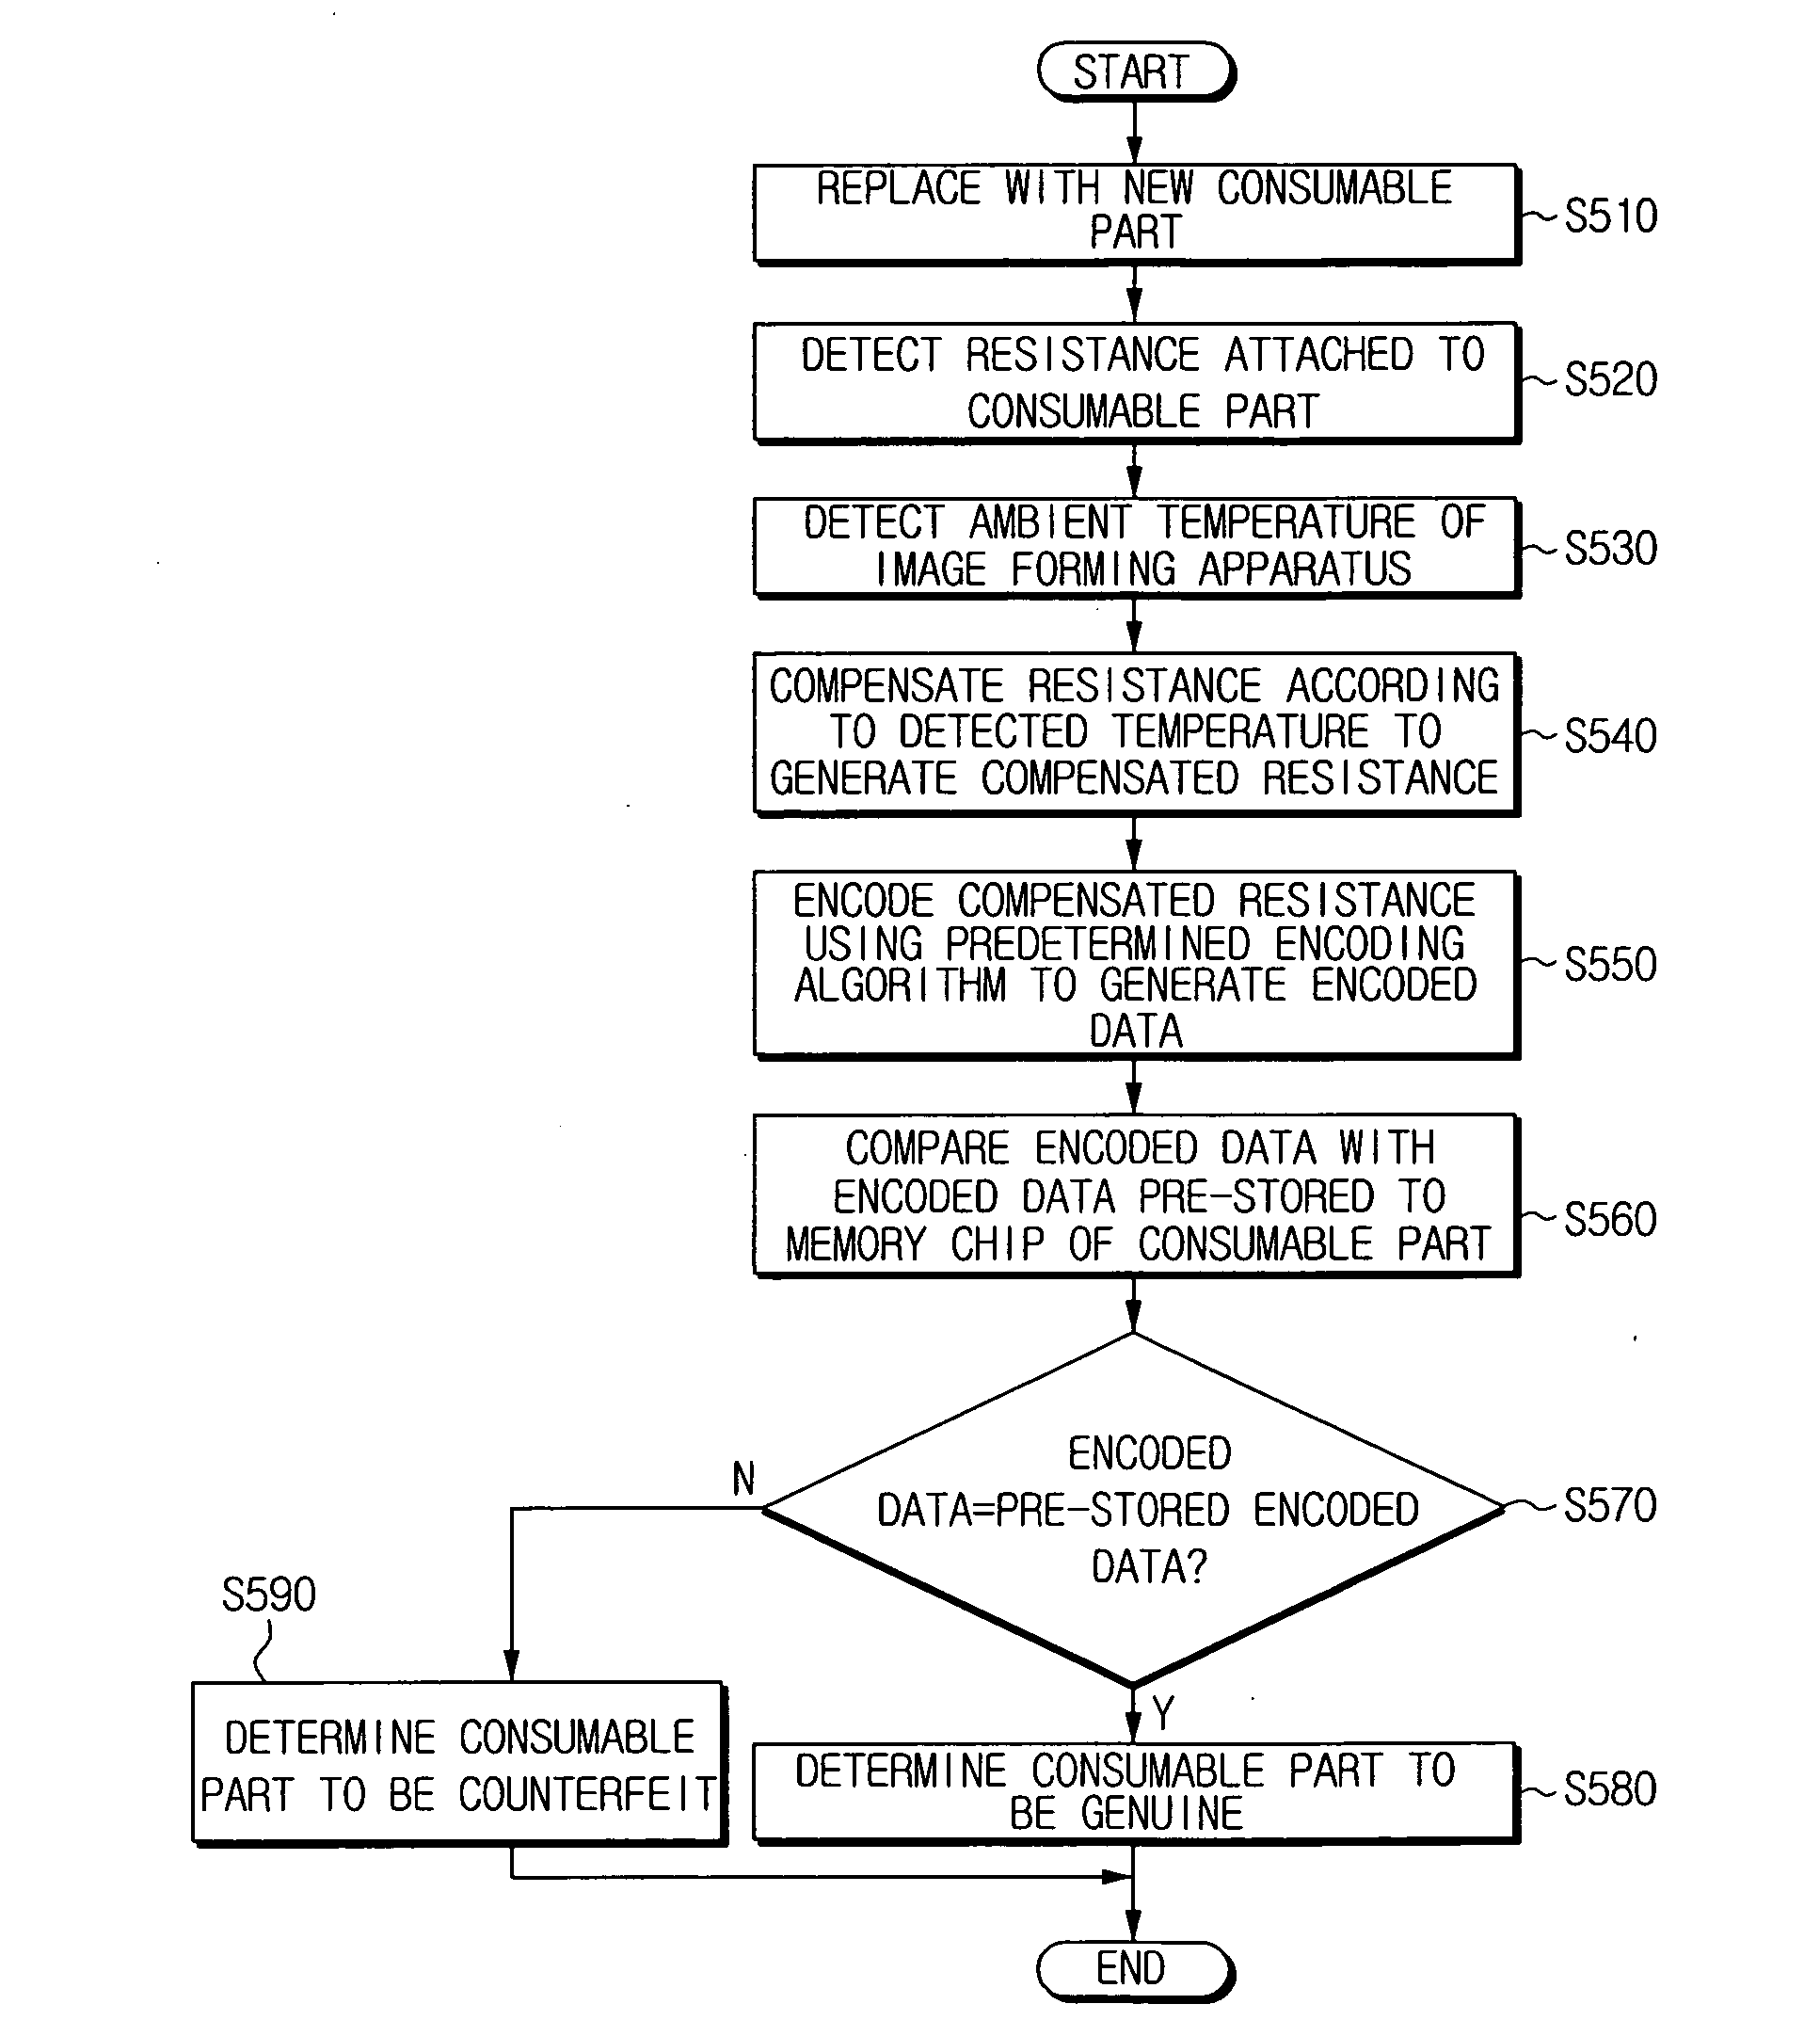 Method and apparatus for verifying genuineness of a consumable part